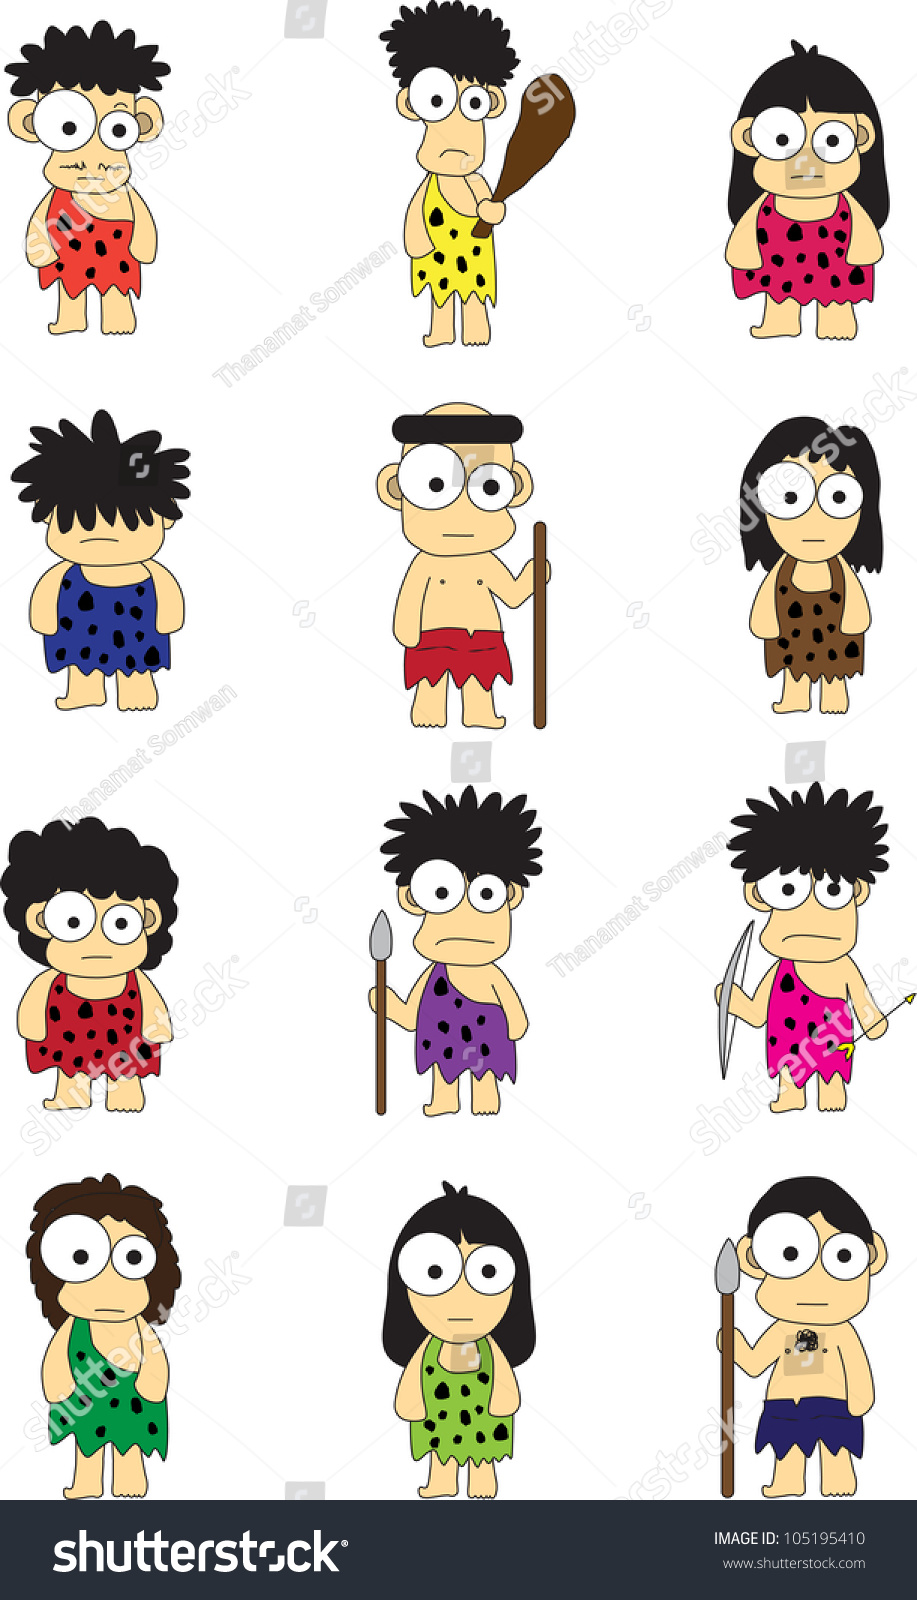 SVG of Stone Age people svg